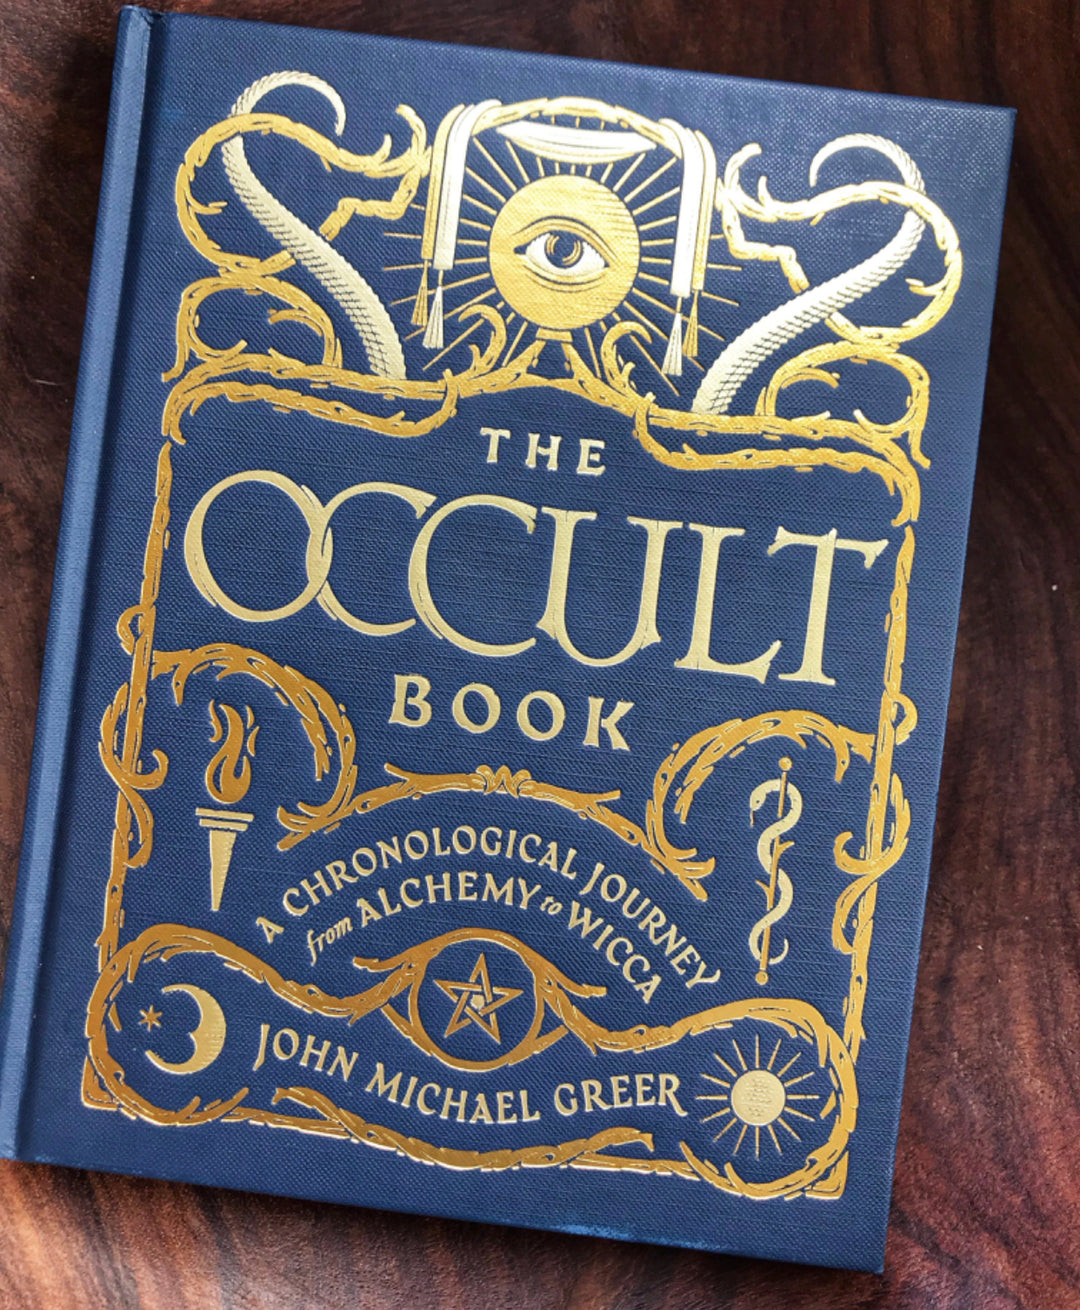 The Occult Book: A Chronological Journey from Alchemy to Wicca by John Michael Greer - Spirits Magick